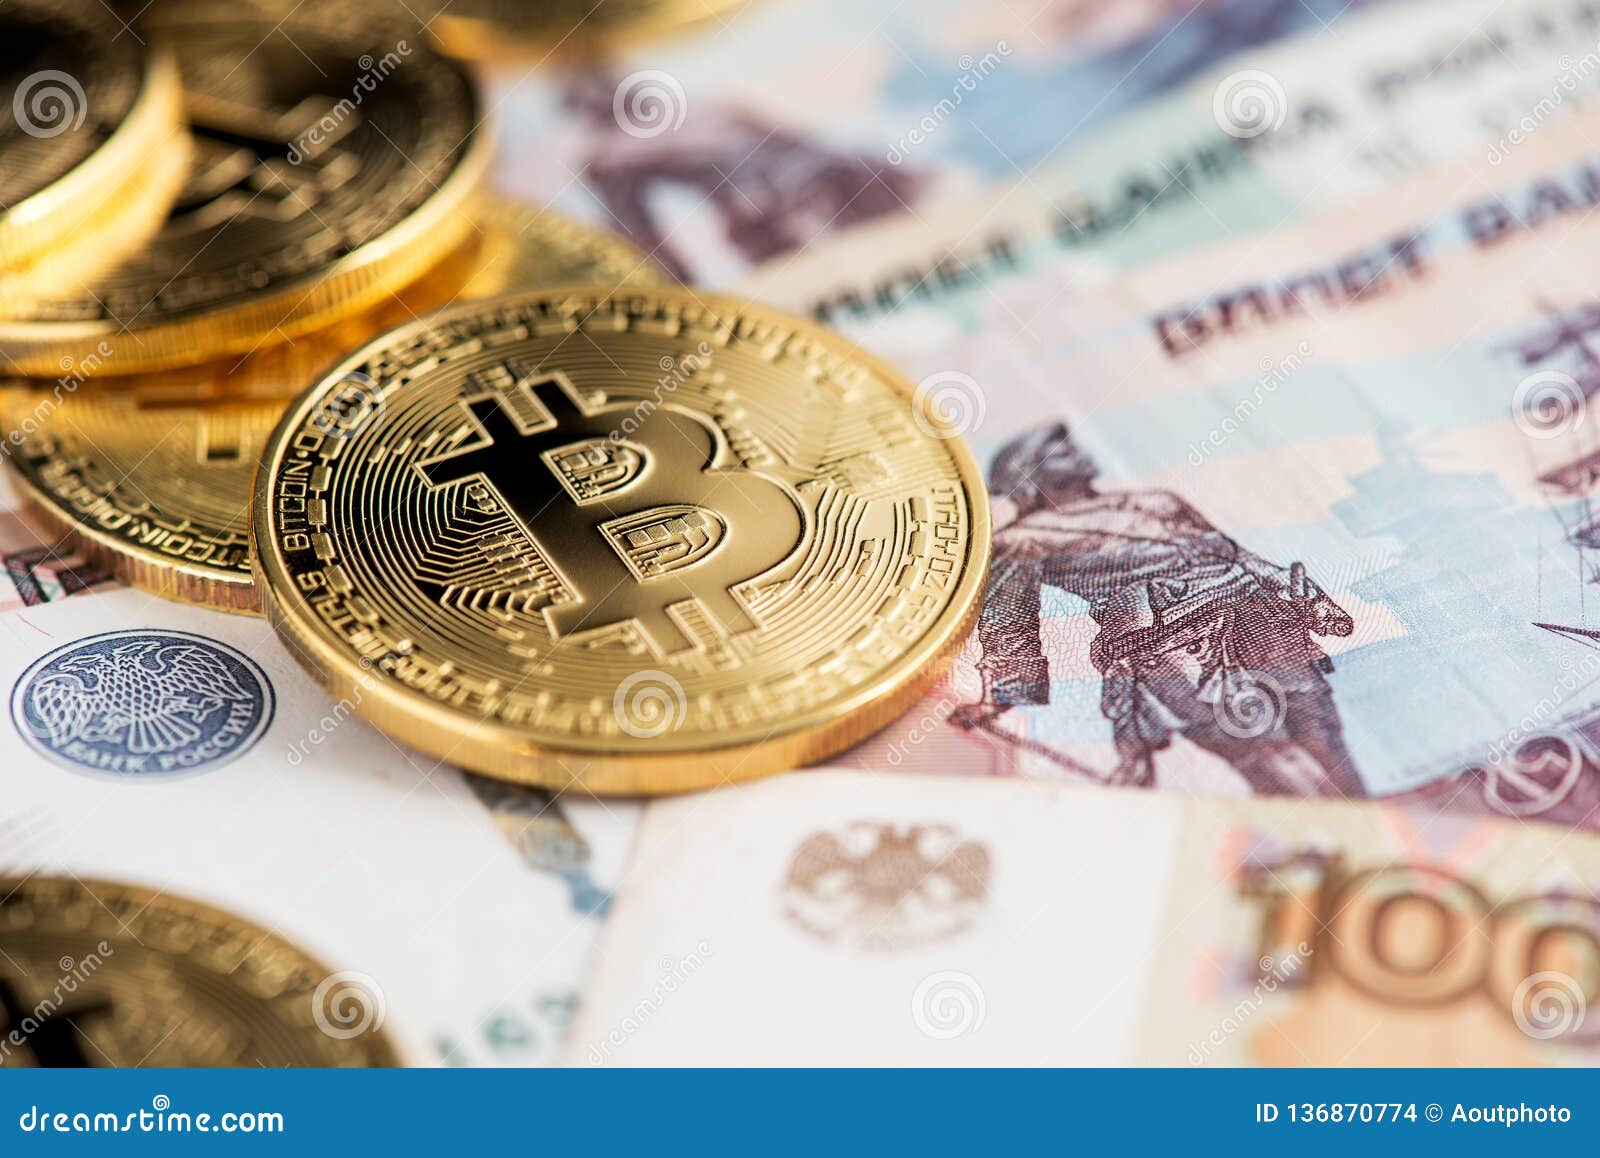 A Close Up Image Of Bitcoins With Russian Rubles Banknotes. Stock Photo ...